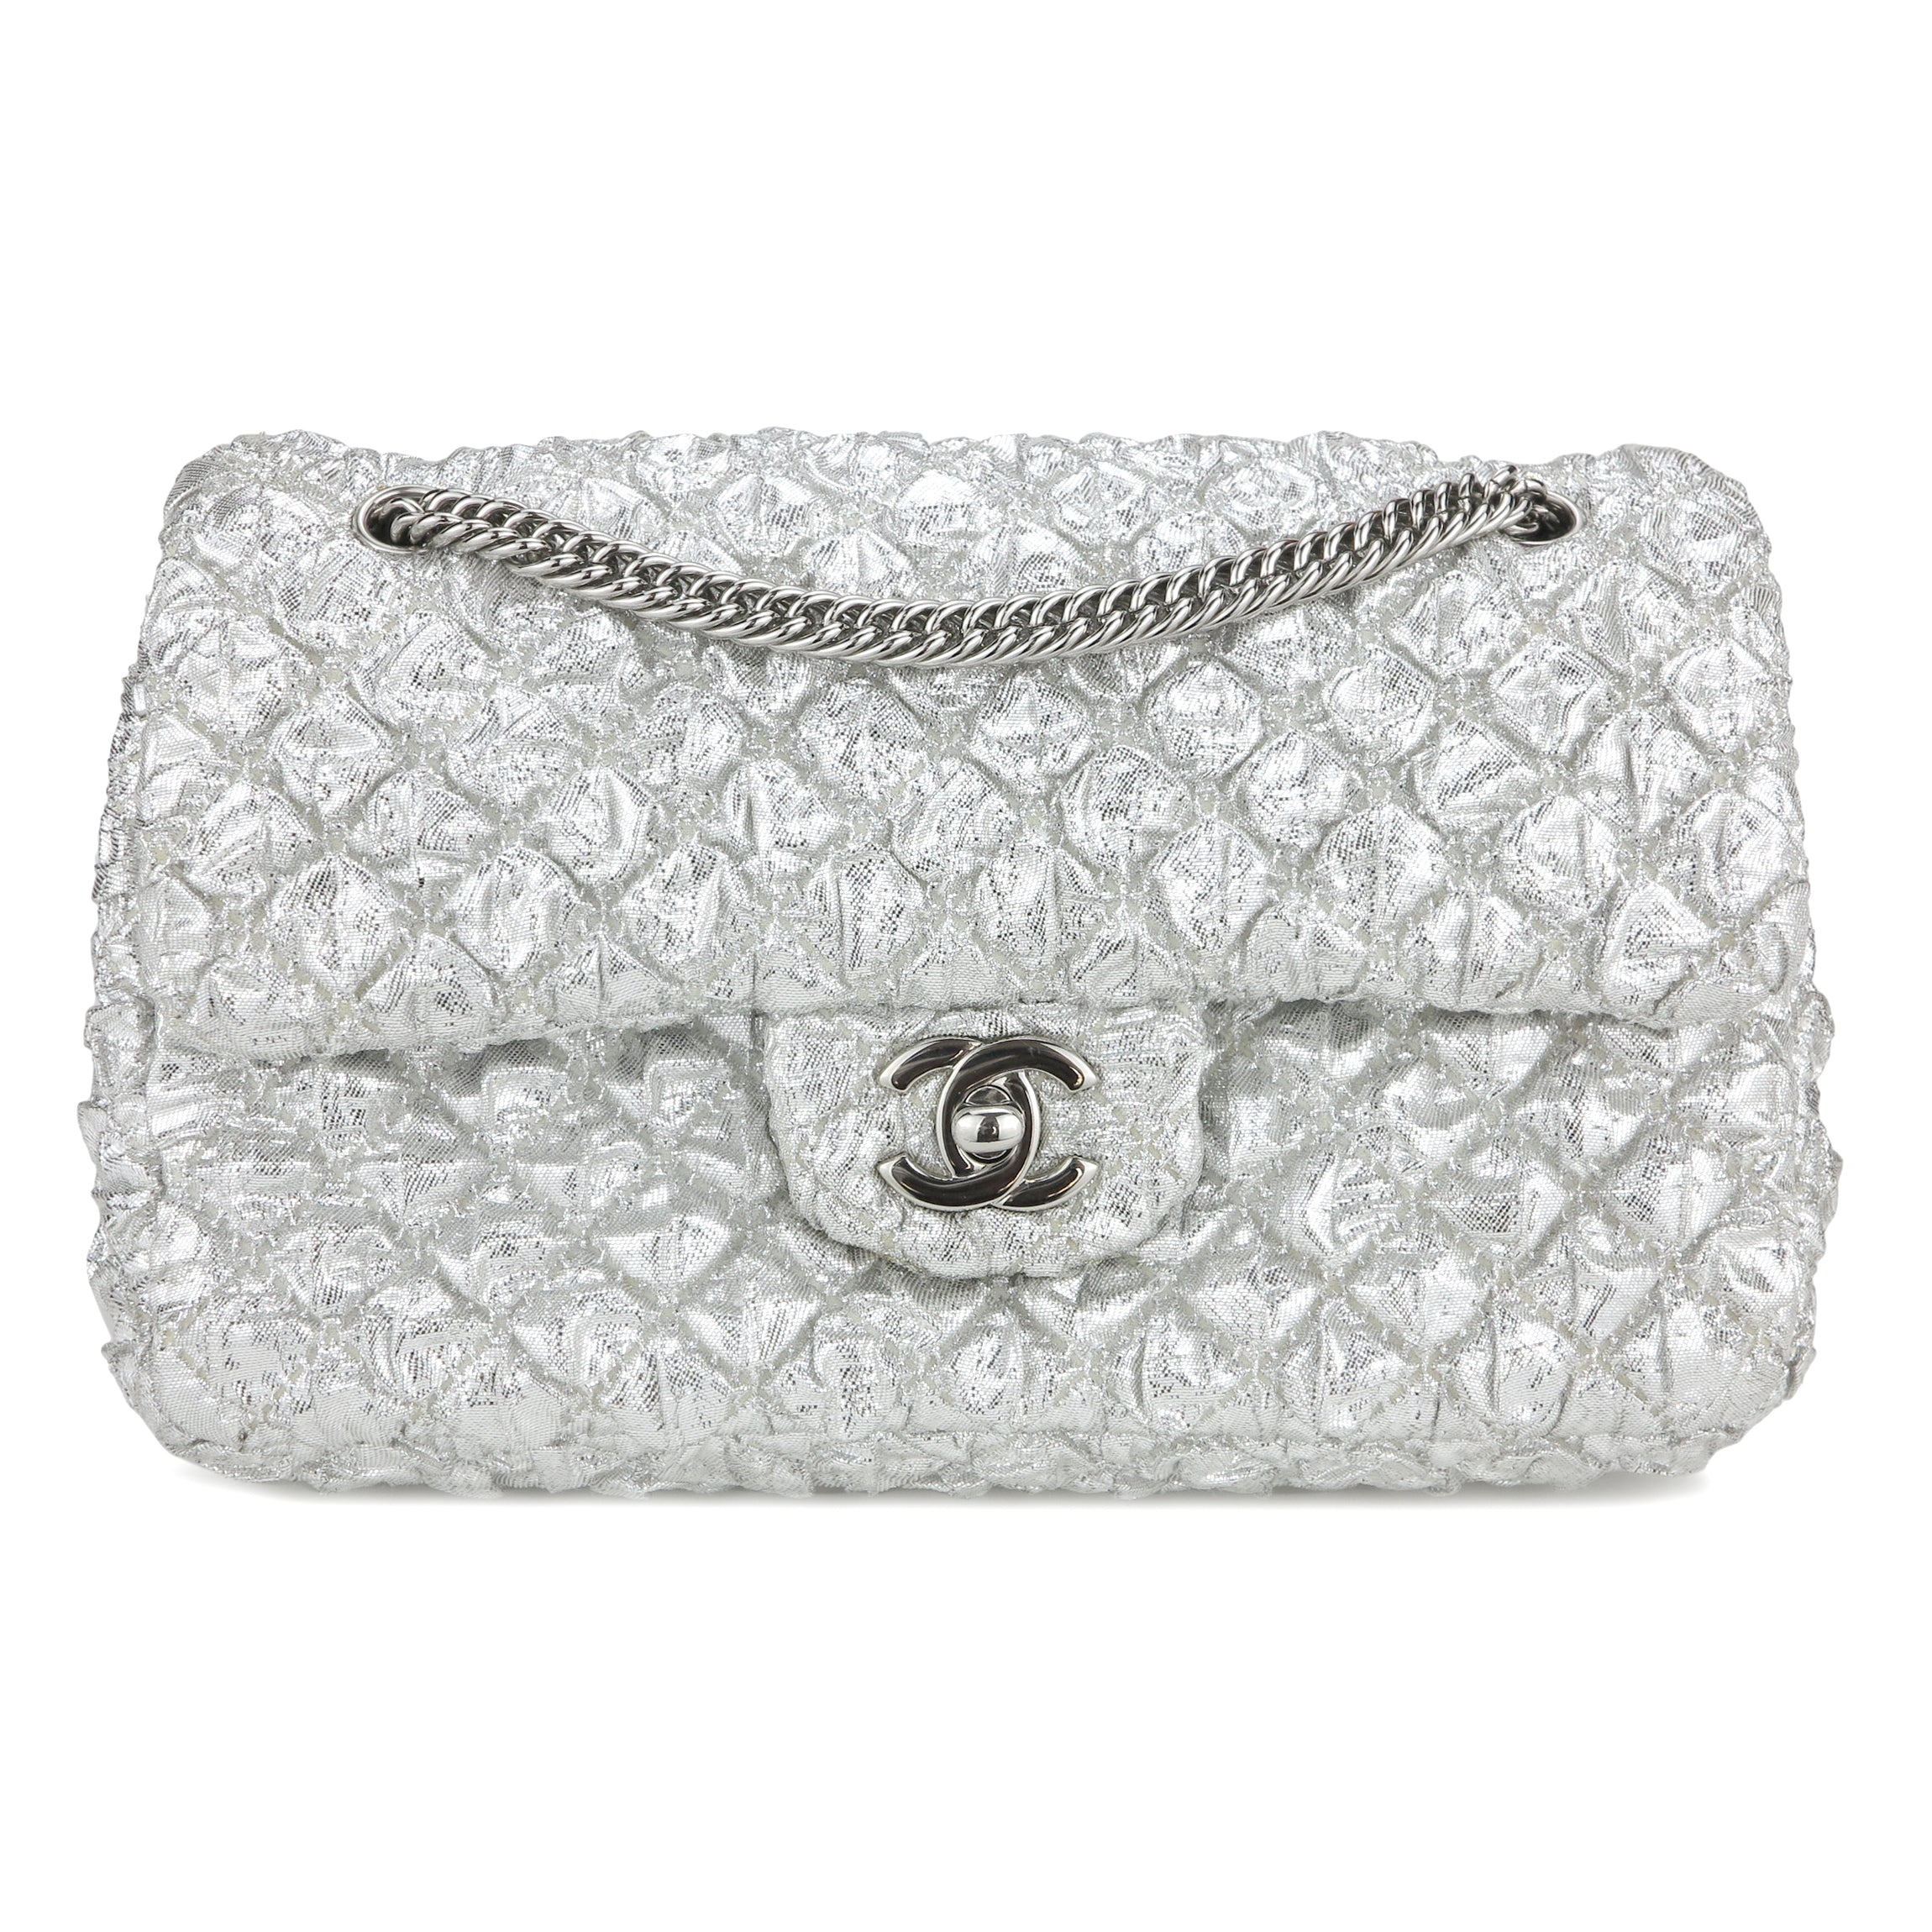 Chanel Small Up In The Air Flap Bag - Metallic Shoulder Bags